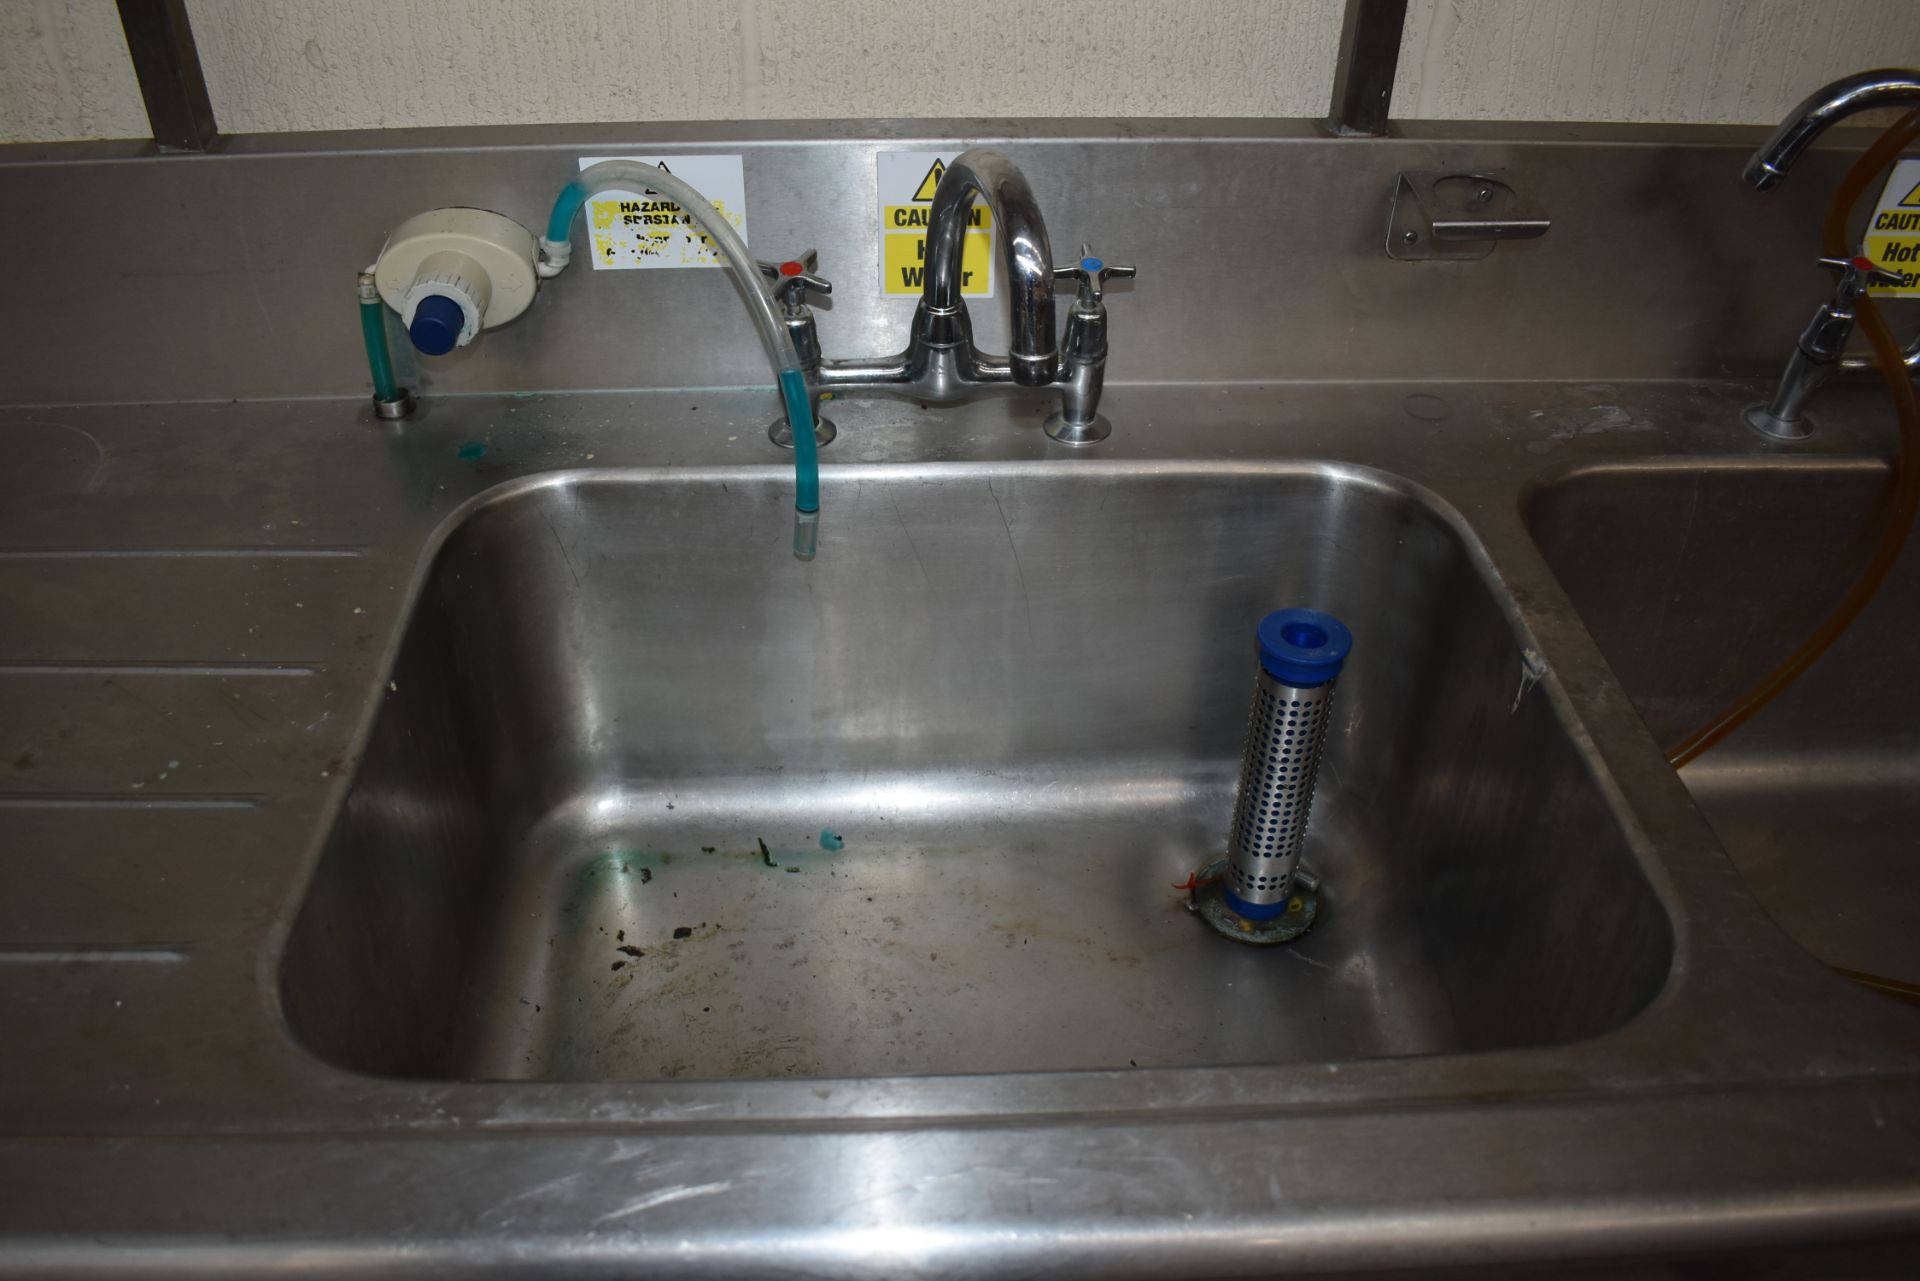 1 x Stainless Steel Commercial Wash Basin Unit With Twin Sink Bowl, Mixer Taps, Undershelf, - Image 3 of 8